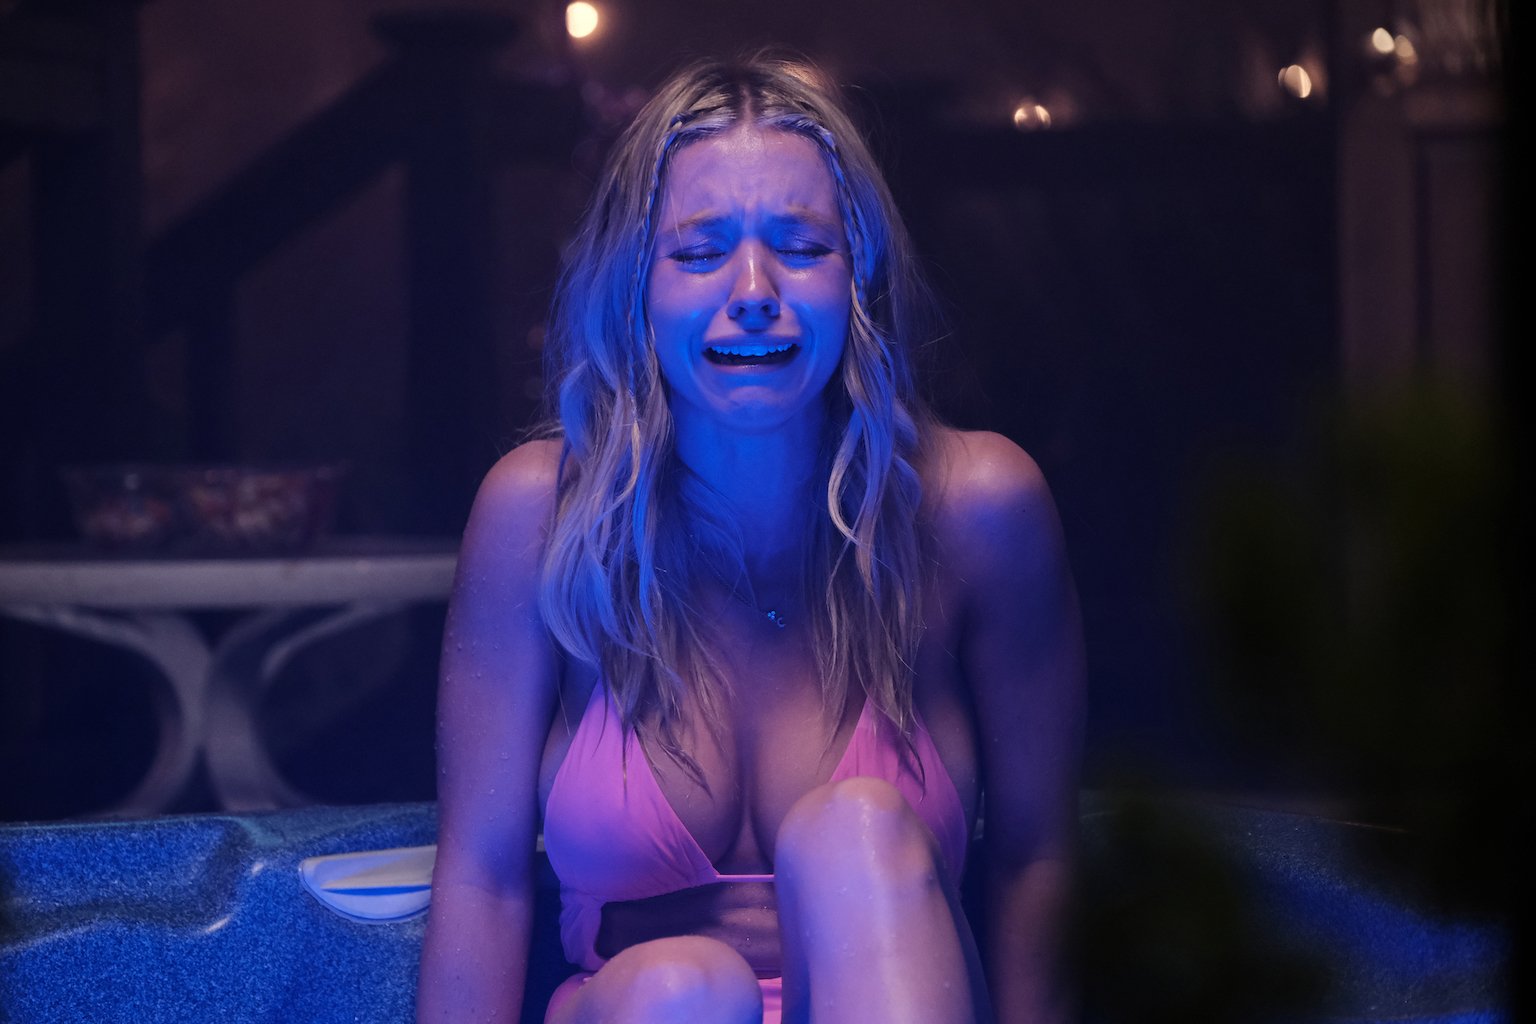 Cassie Howard crying in a hot tub in 'Euphoria' Season 2 Episode 4